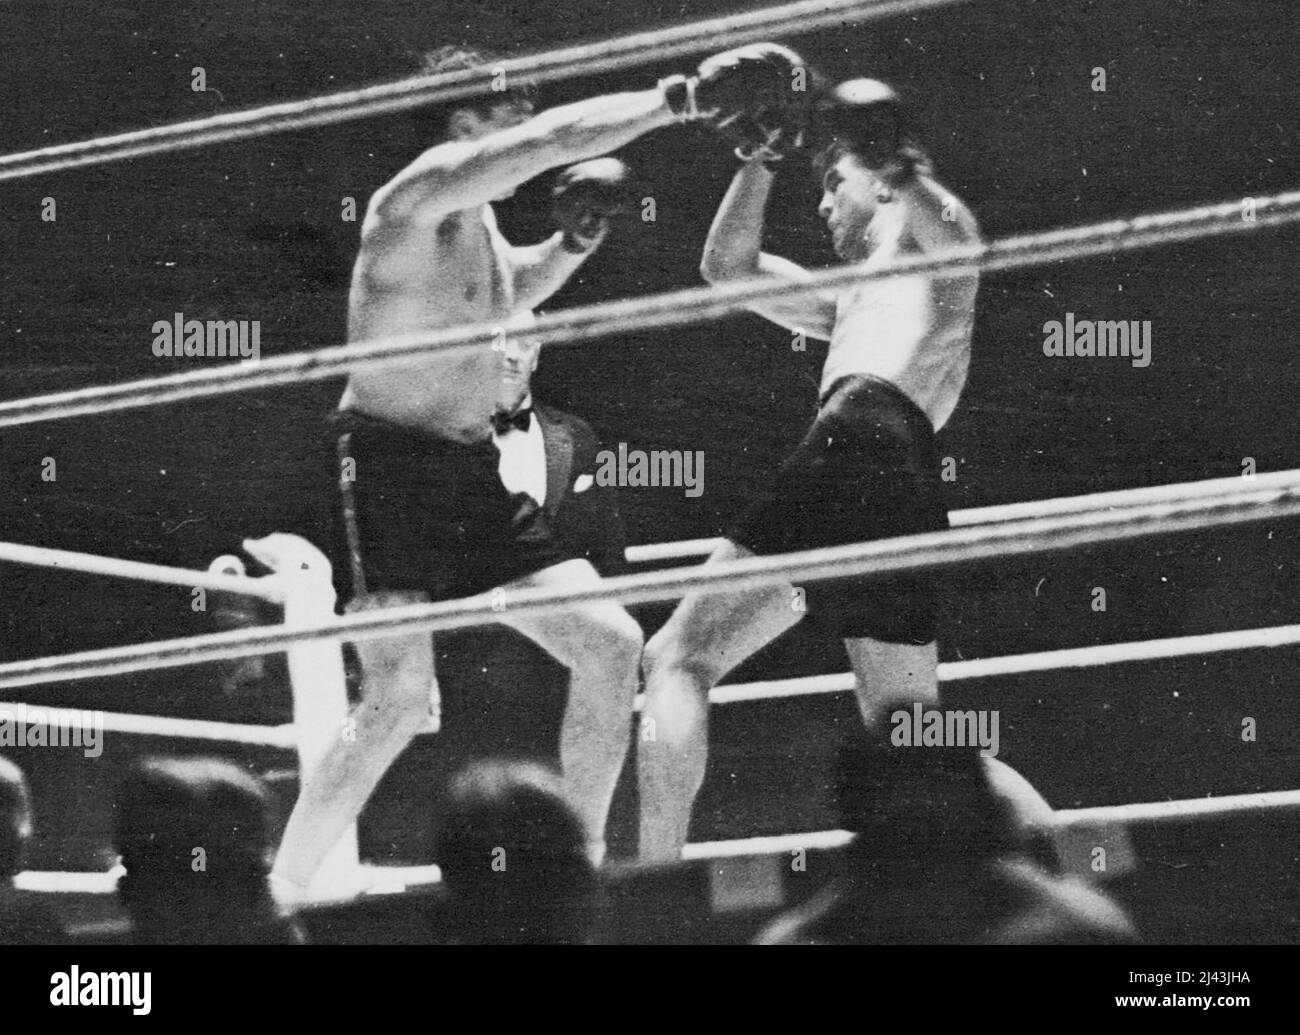 Strickland (right) avoiding a right from Loughran. Tommy Loughran (U.S.A.) beat Maurice Strickland (New Zealand) on points in their bout at the Wembley Pool, London tonight. November 12, 1935. (Photo by The International Graphic Press Ltd.). Stock Photo